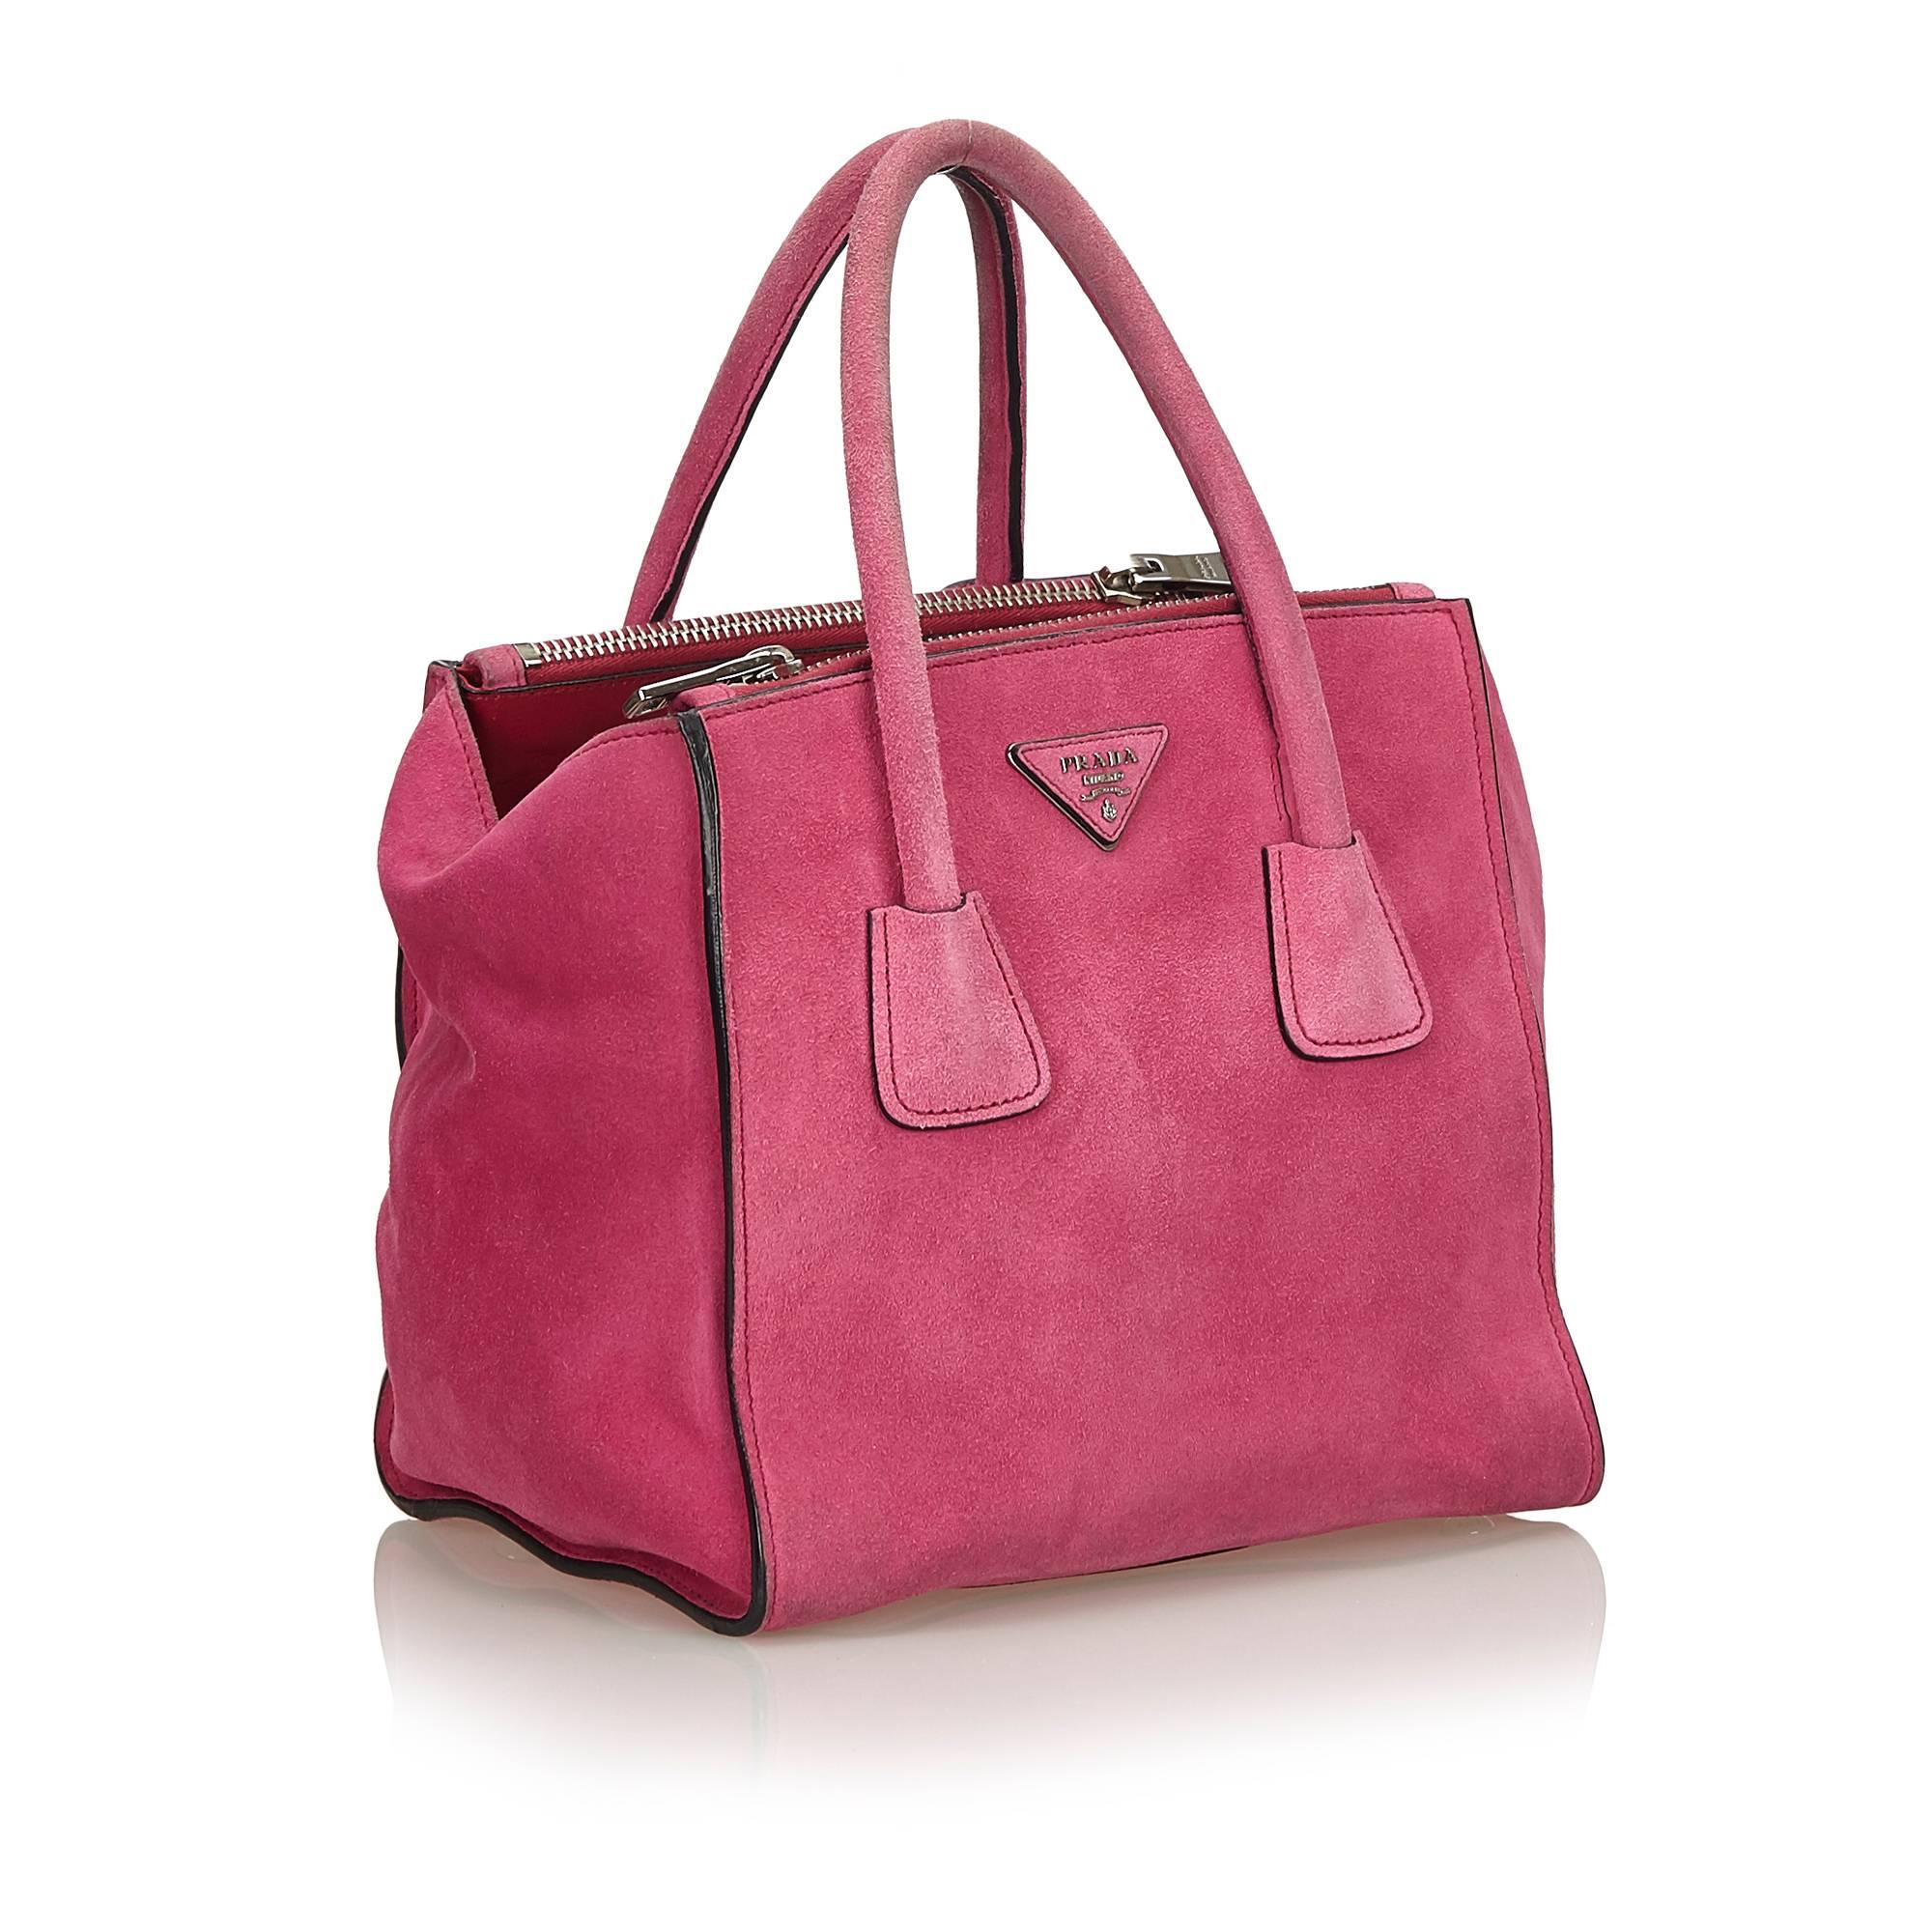 The Twin Pocket Bag features a suede leather body, rolled leather handles, zip compartments, button clasp closure, and interior zip pocket. 

It carries a B condition rating.

Dimensions: 
Length 23 cm
Width 24 cm
Depth 18 cm
Shoulder Drop 12